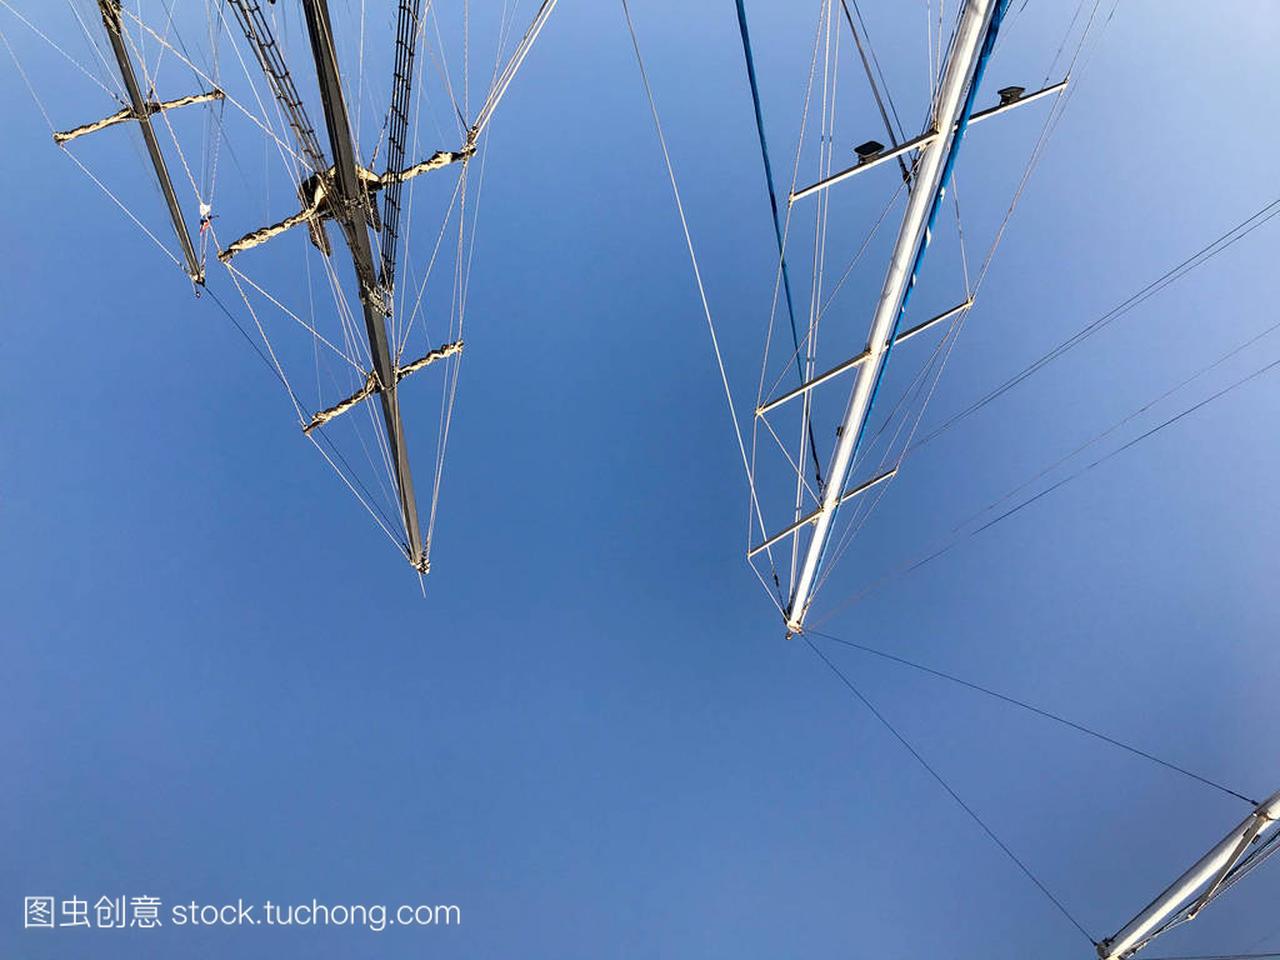 Large tall masts, a vertically standing structure o